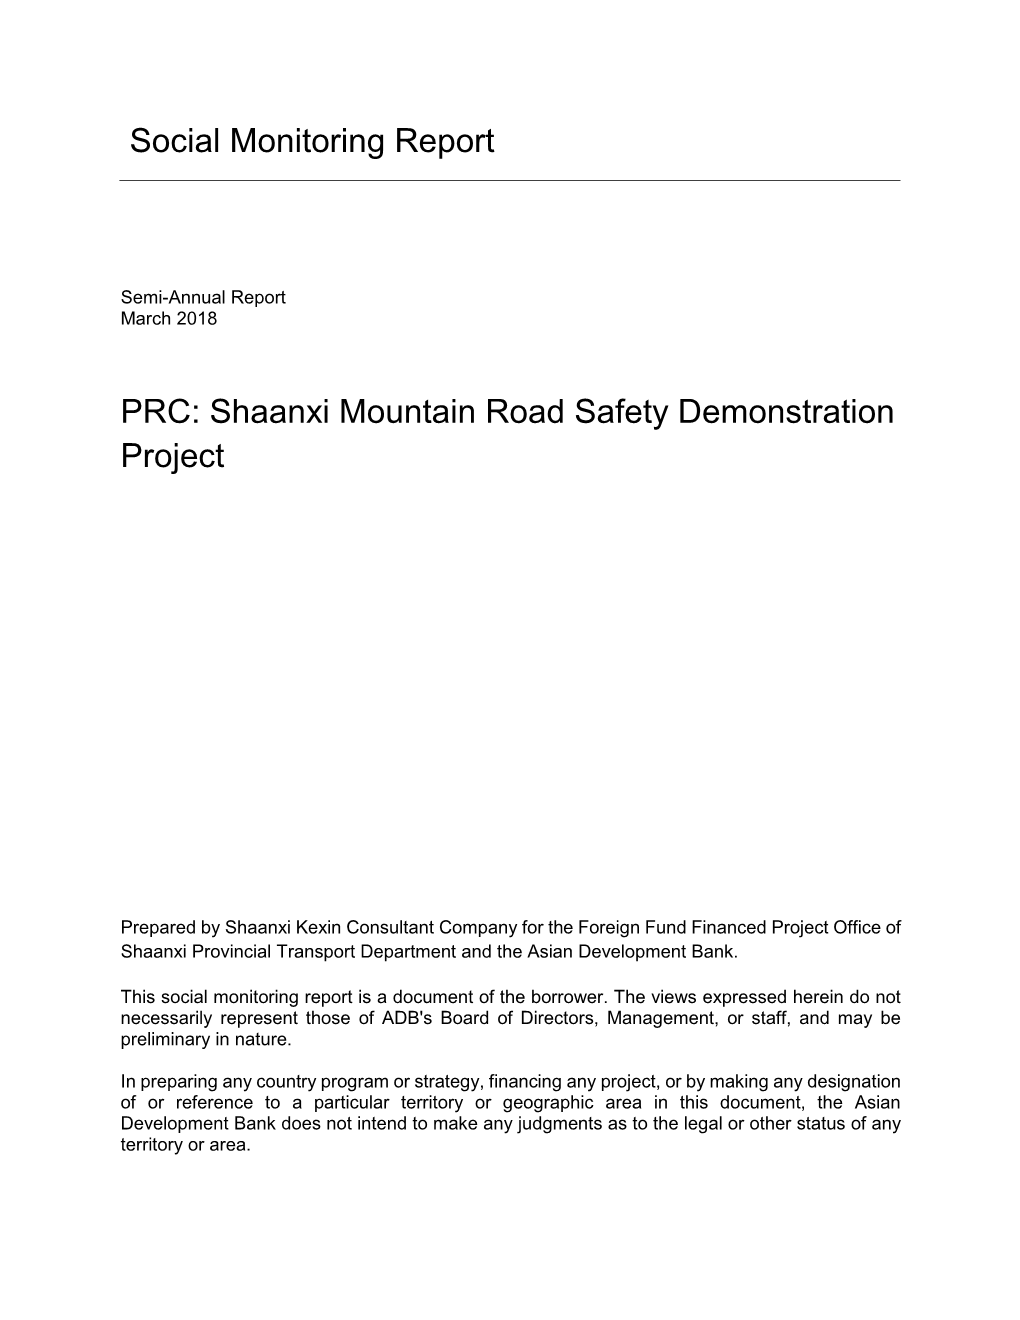 46042-002: Shaanxi Mountain Road Safety Demonstration Project